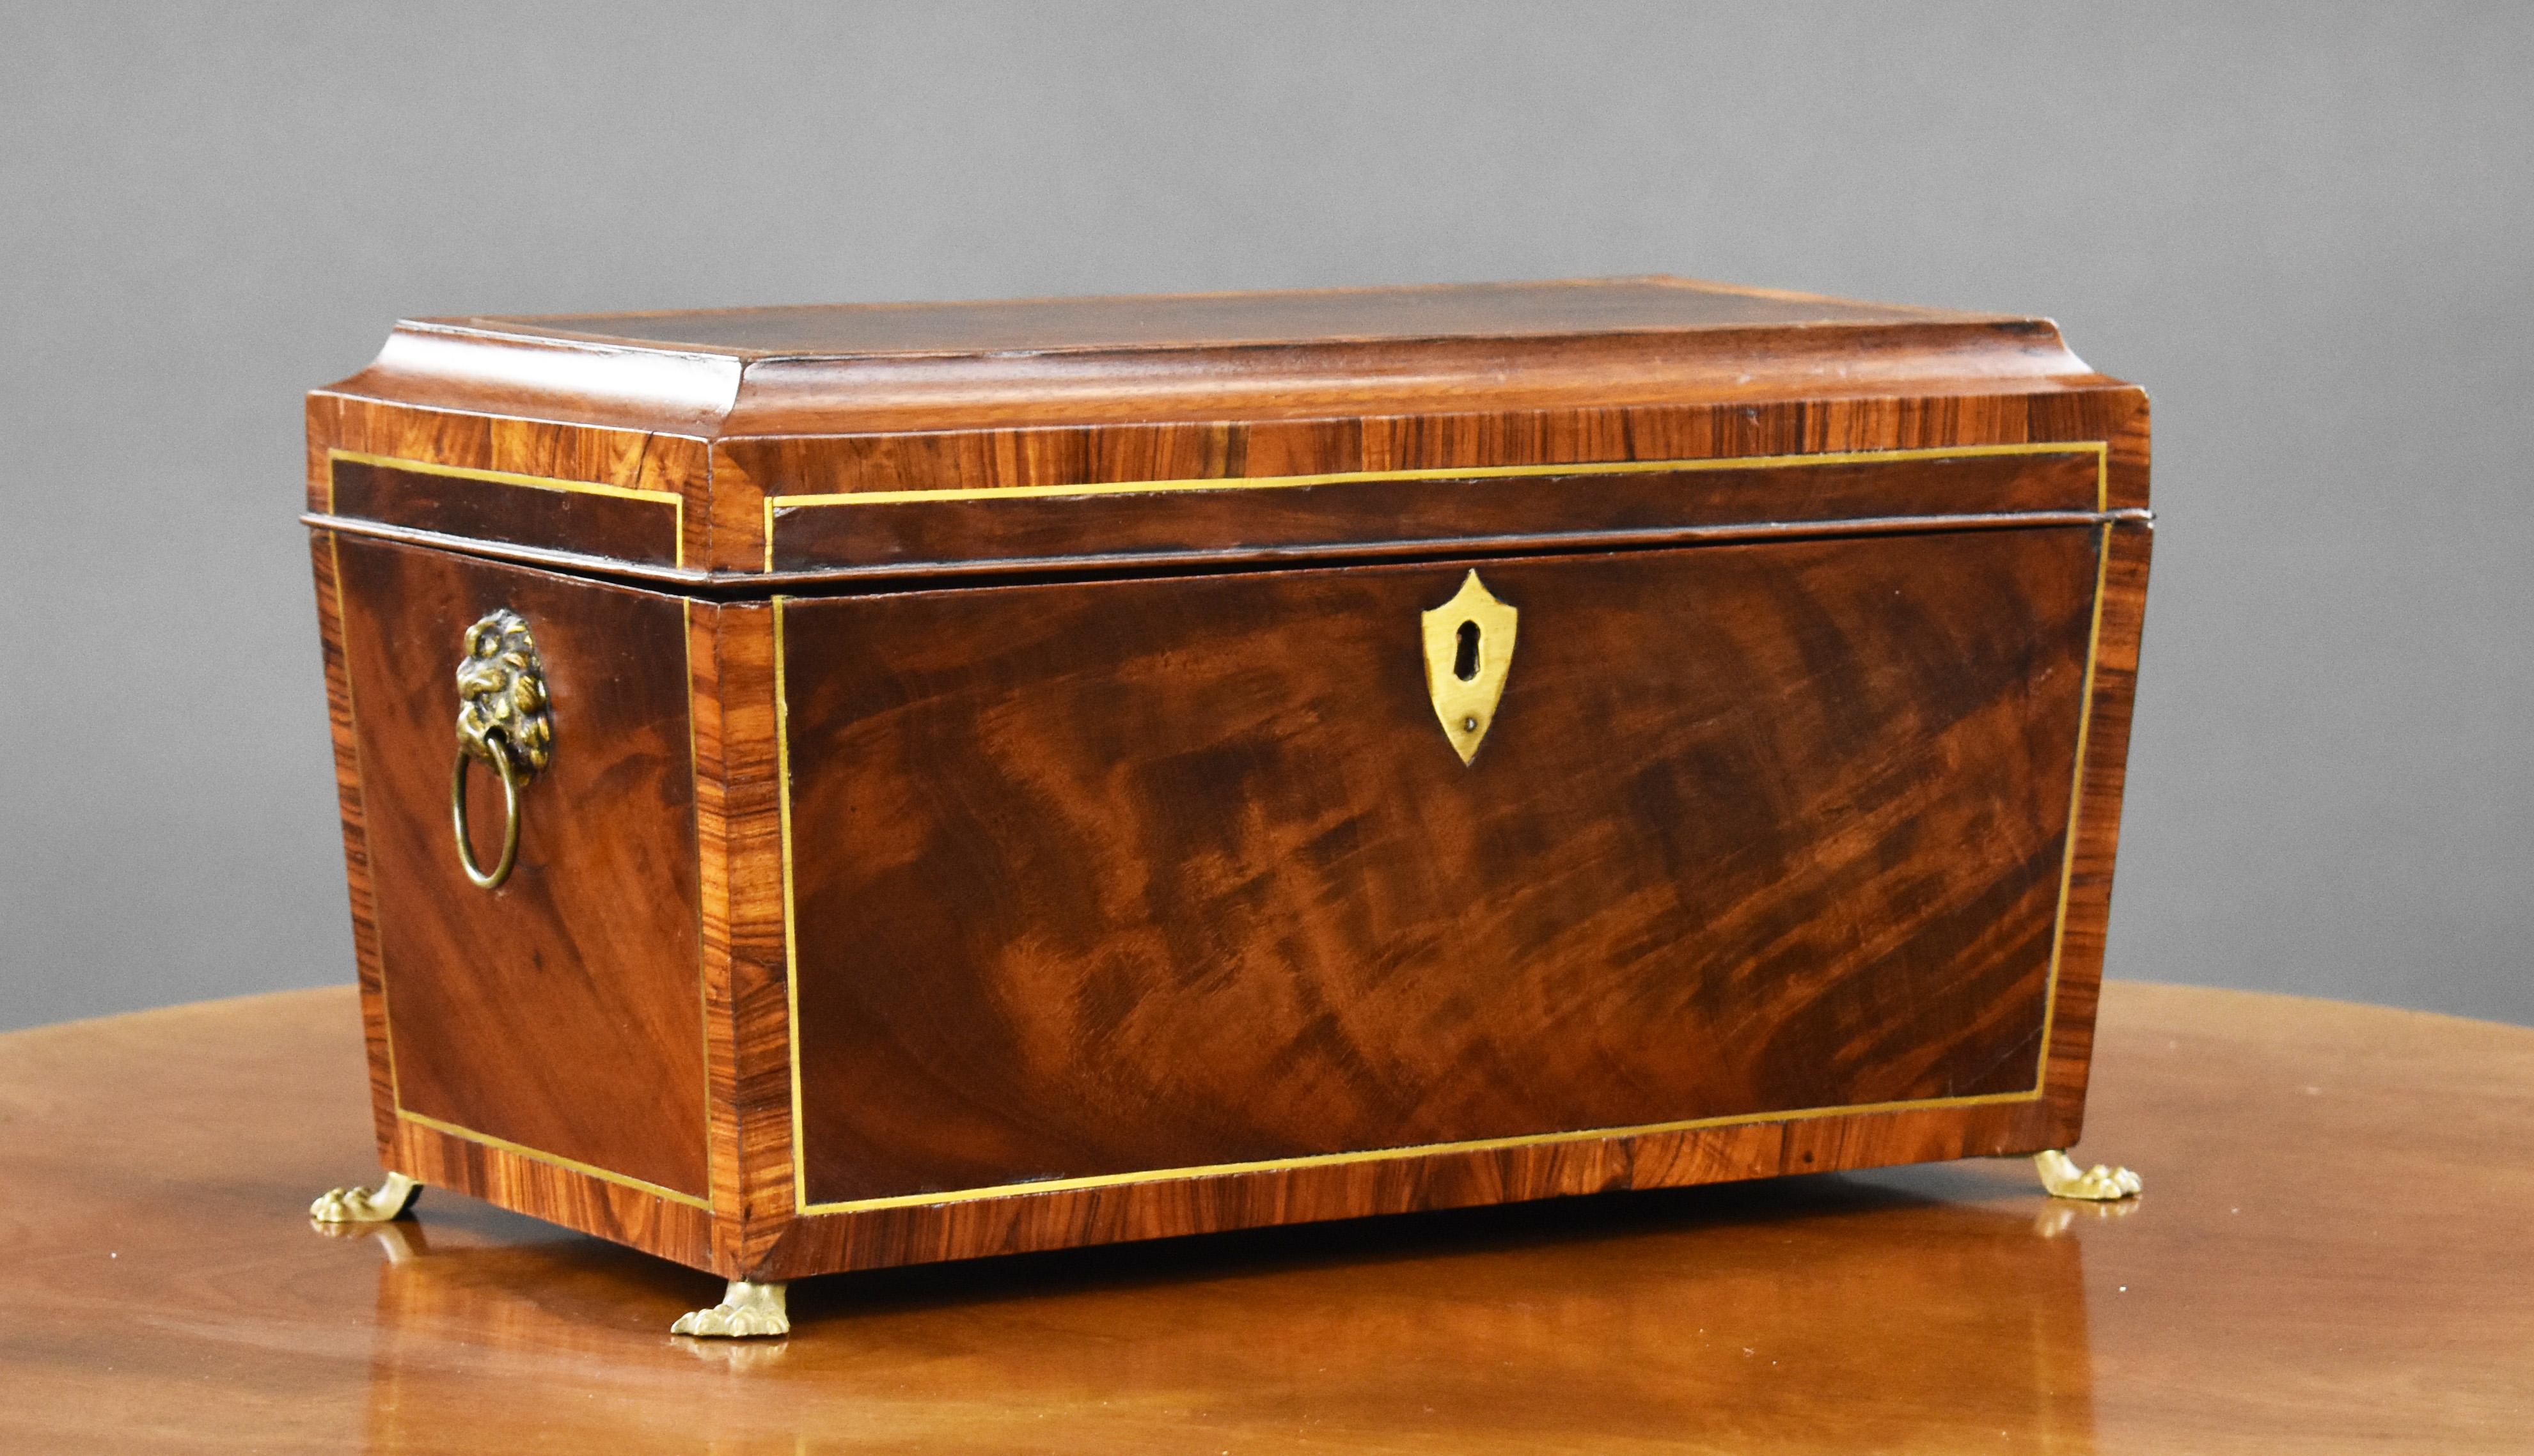 A good quality George III flame mahogany tea caddy. Of classic sarcophagus shape, decorated with cut brass stringing and rosewood cross banding, the top open to reveal two twin lift out caddies with hinged lids for green and black teas as well as a